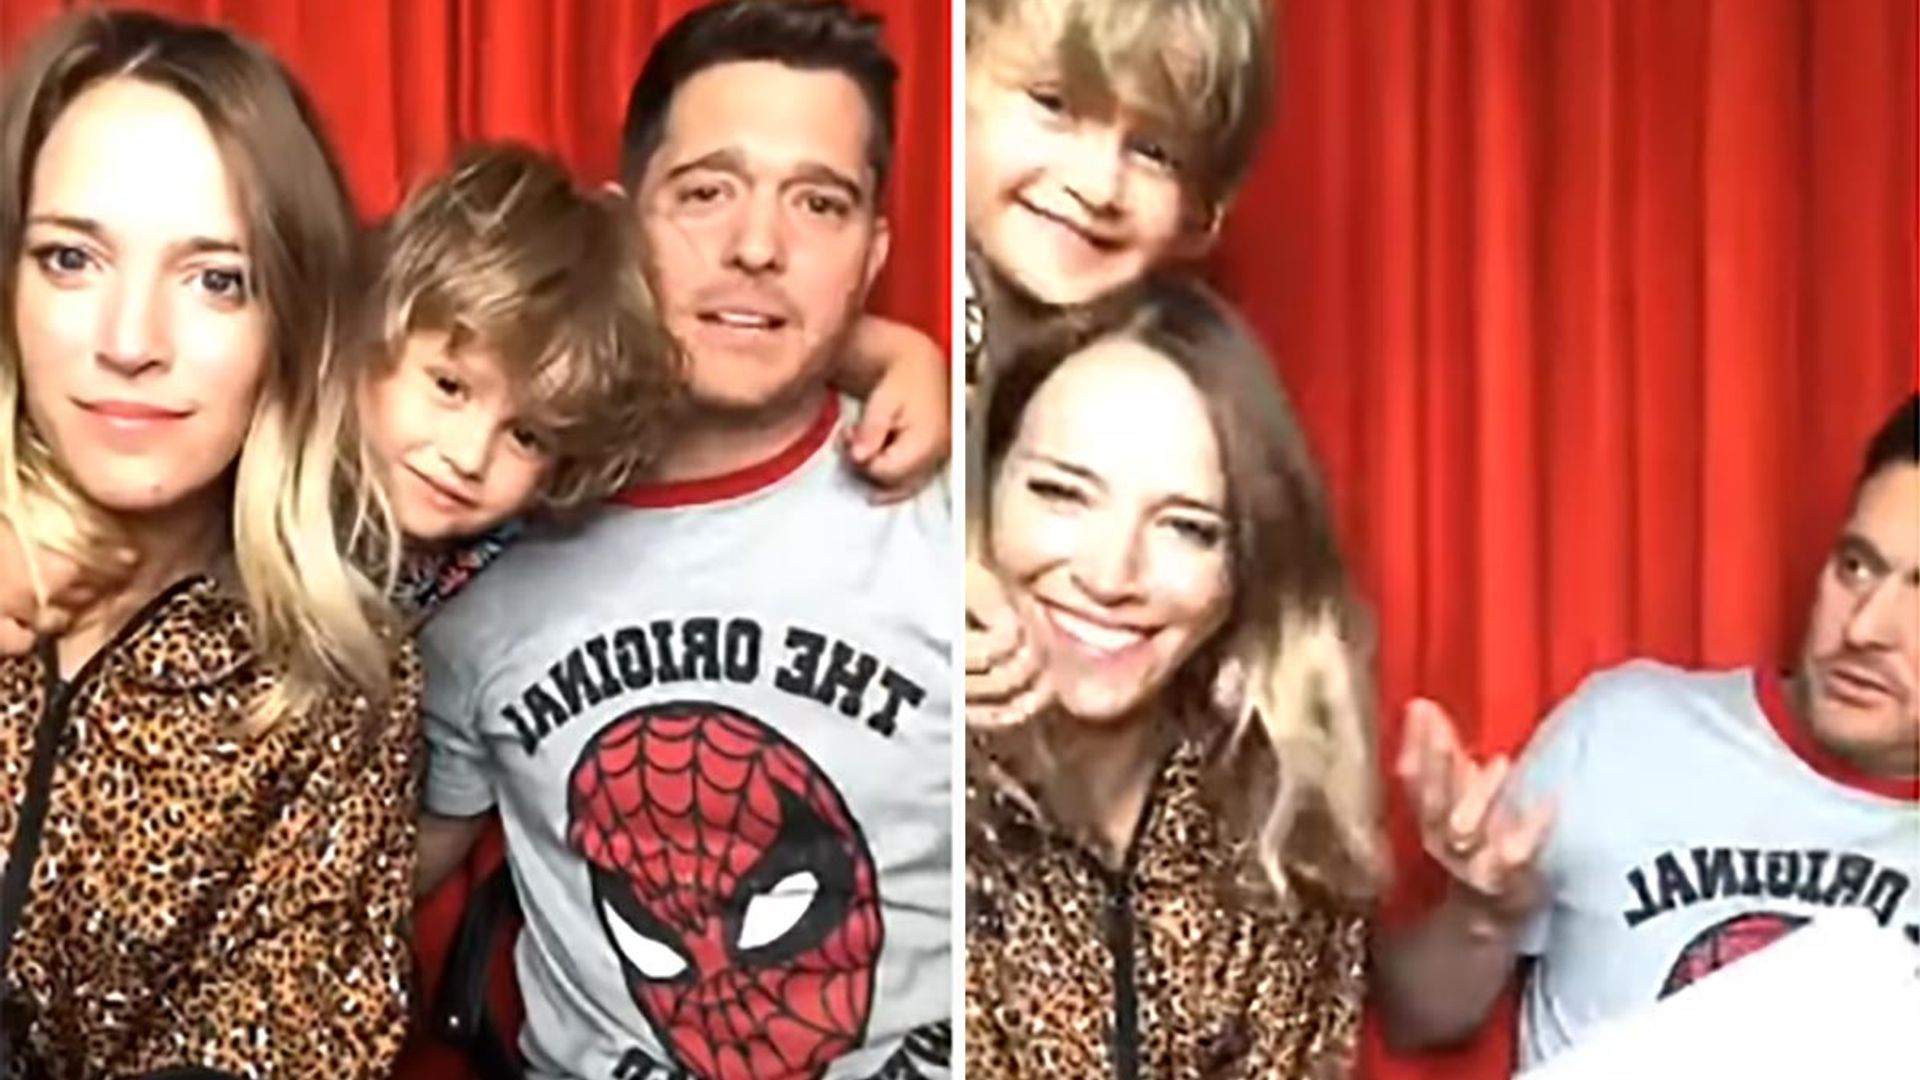 Michael Bublé and Luisana Lopilato's son Noah interrupts live stream to reveal favourite weekend plans